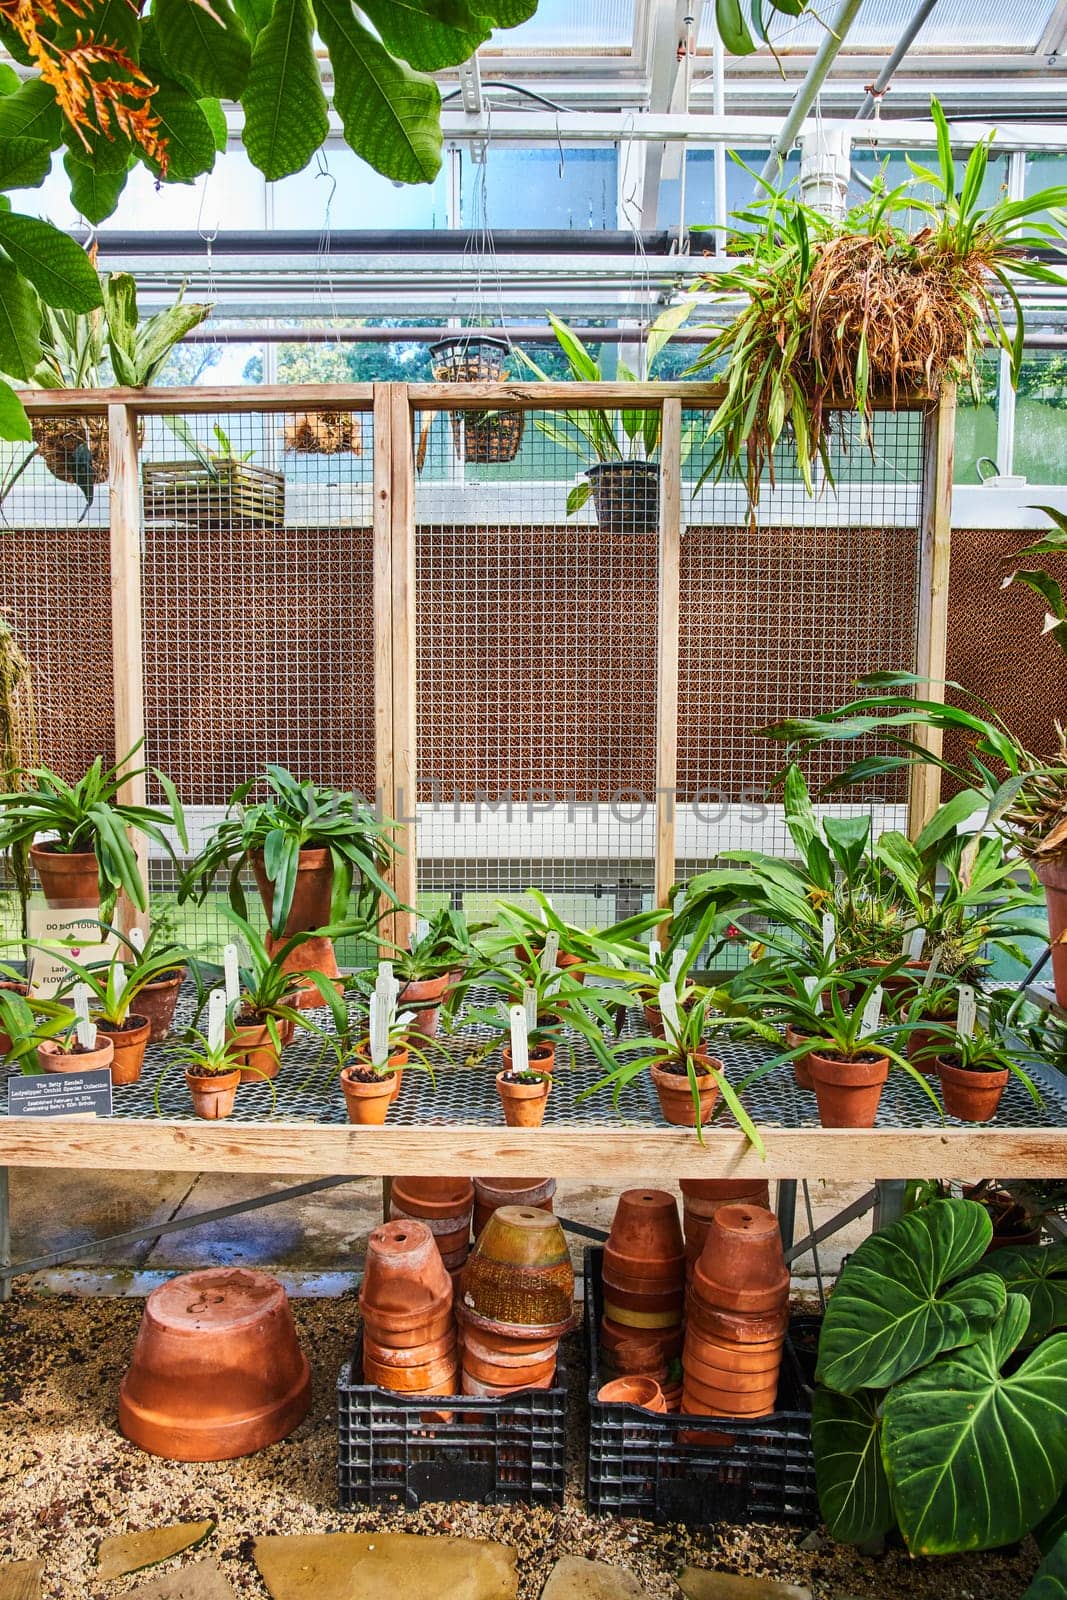 Lush Greenhouse Scene in Muncie, Indiana, Showcasing Vibrant Orchids and Terracotta Pots, 2023